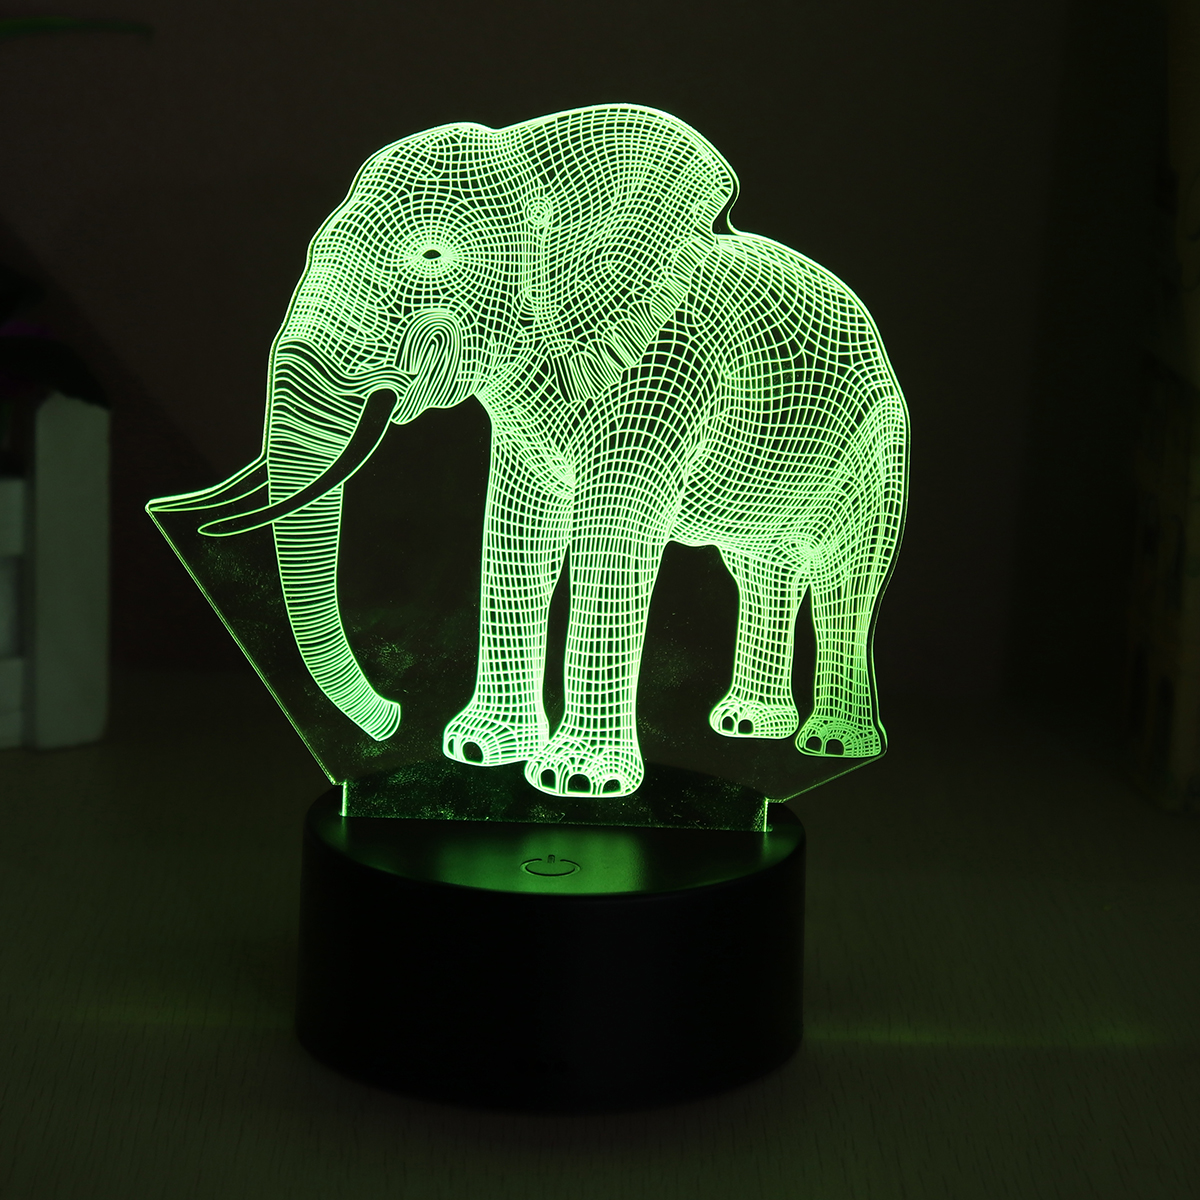 3D-Acrylic-LED-716-Colors-Colorful-Night-Lights-Elephant-Model-Remote-Control-Touch-Switch-Night-Lig-1370467-11